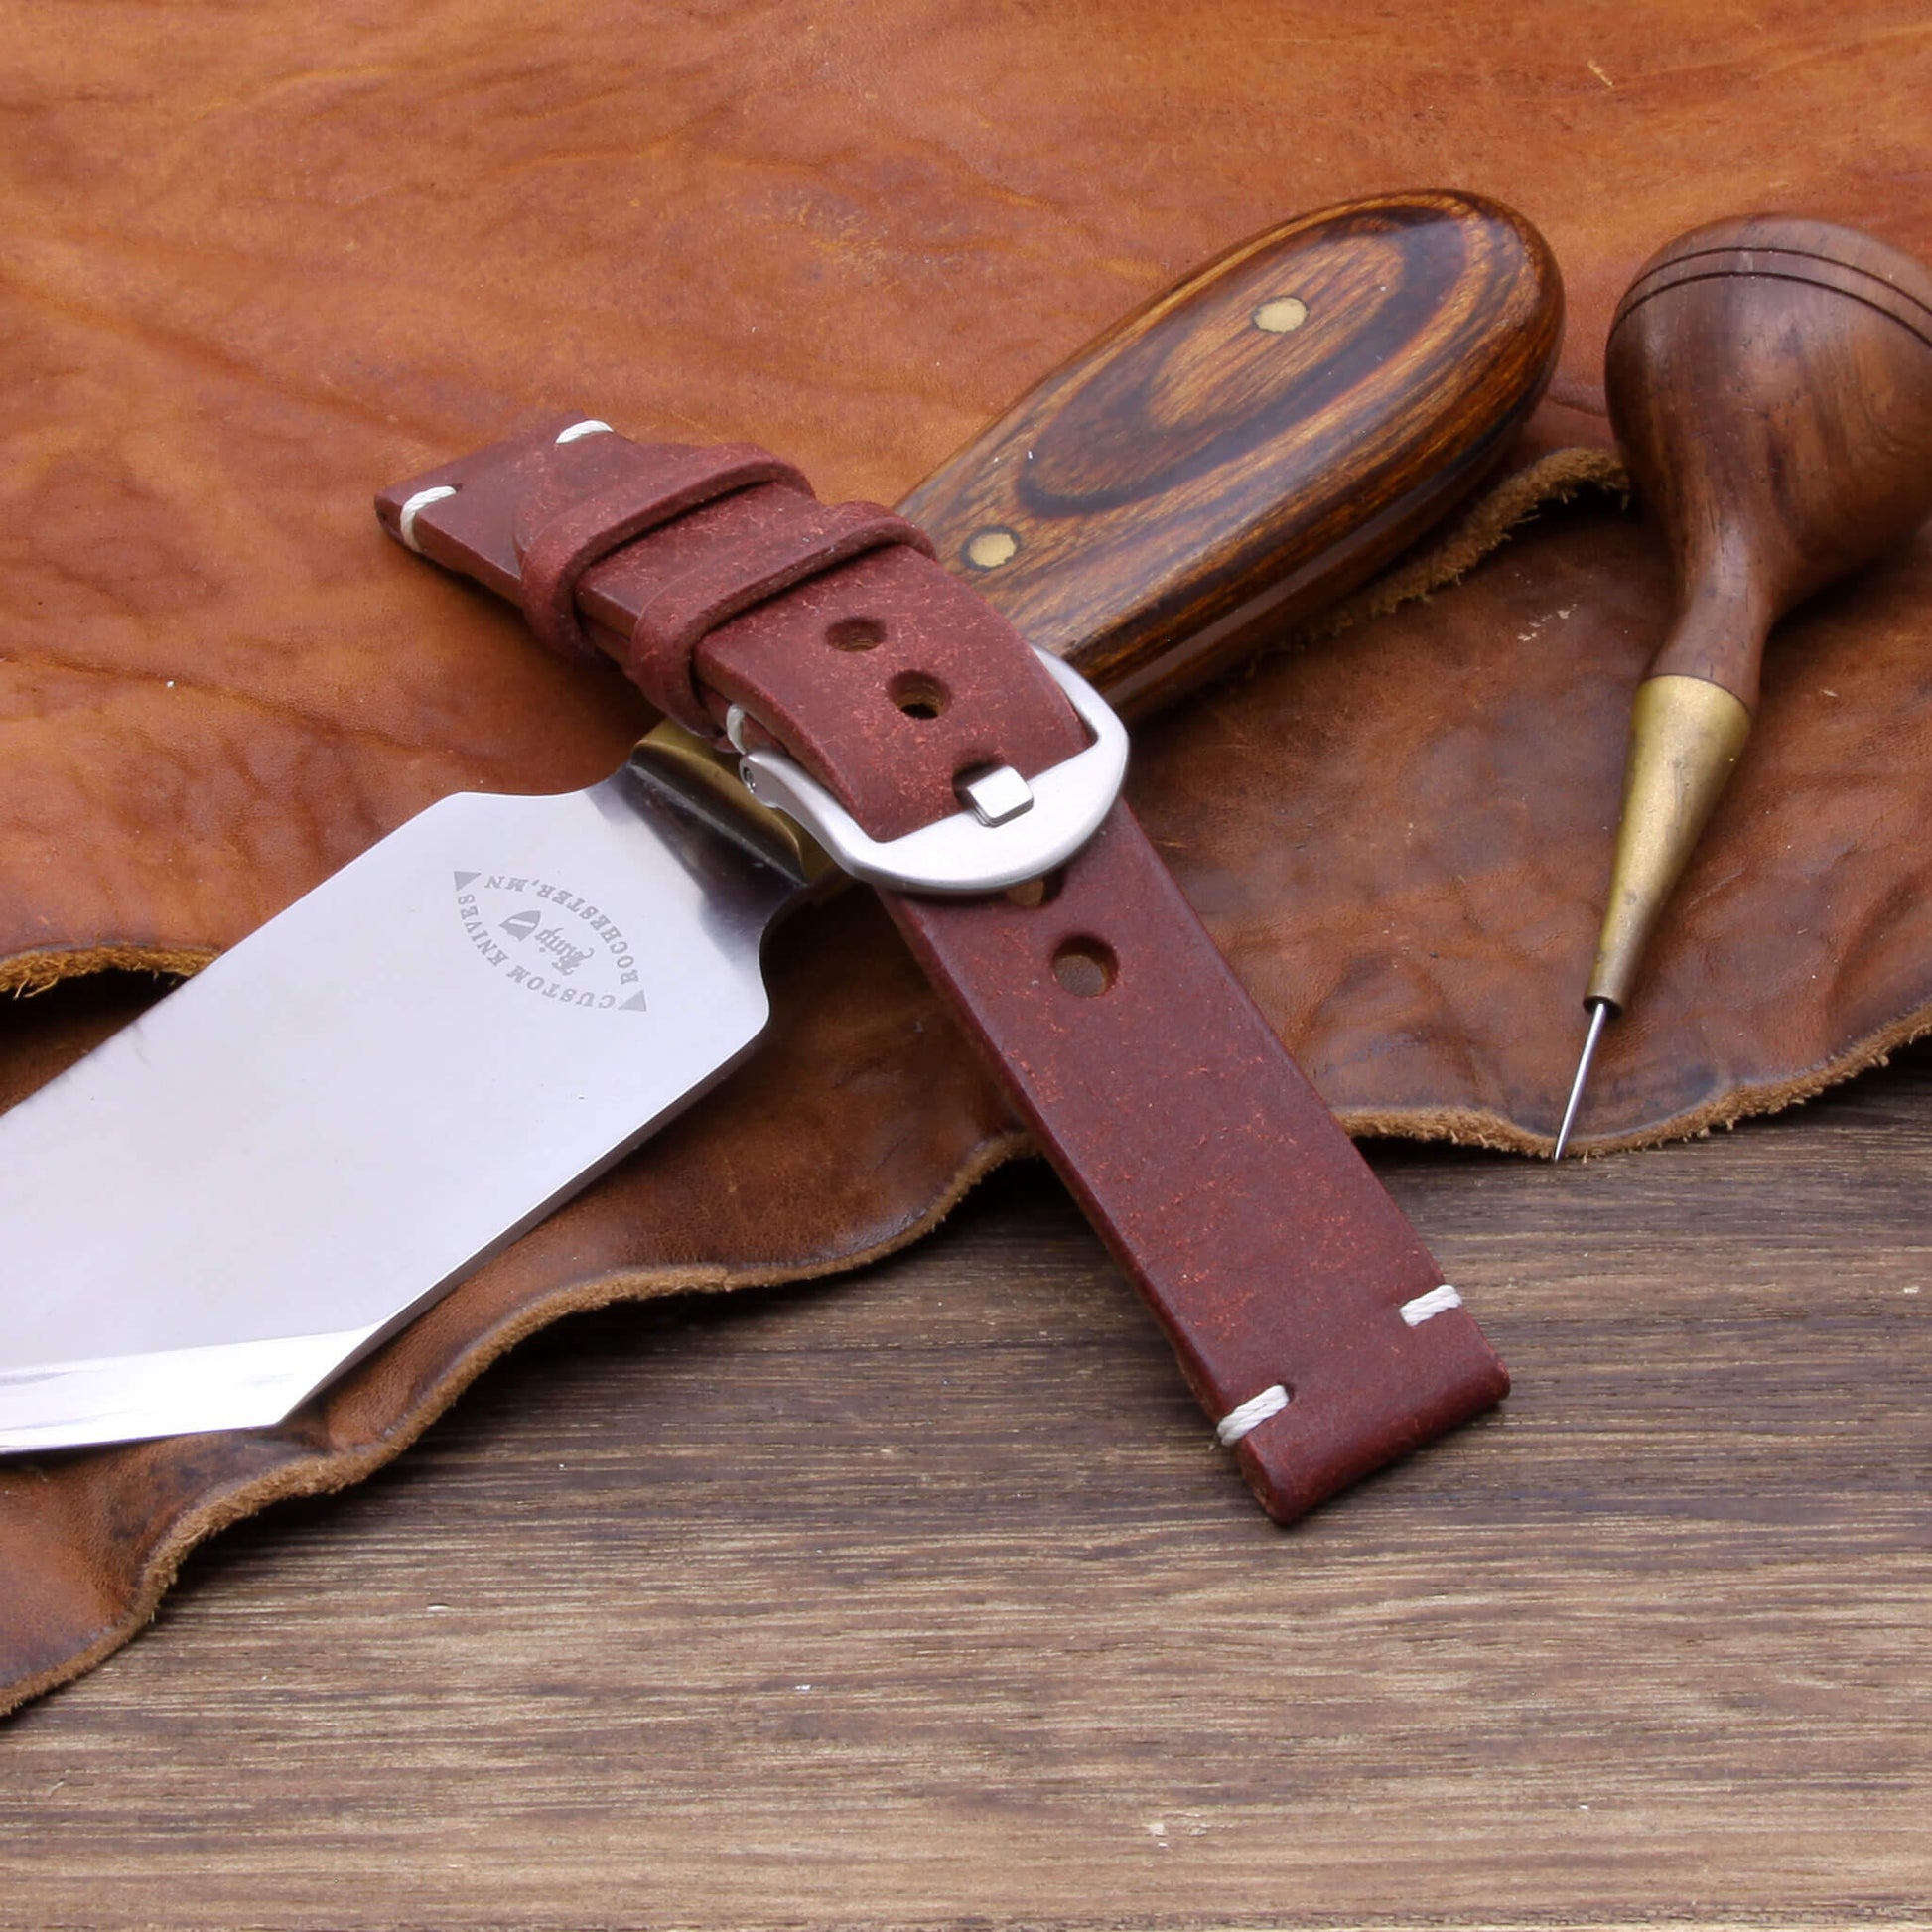 4th View of 2-Piece Minimalist Leather Watch Strap, made with Pueblo Cocinella Italian veg-tanned leather by Cozy Handmade